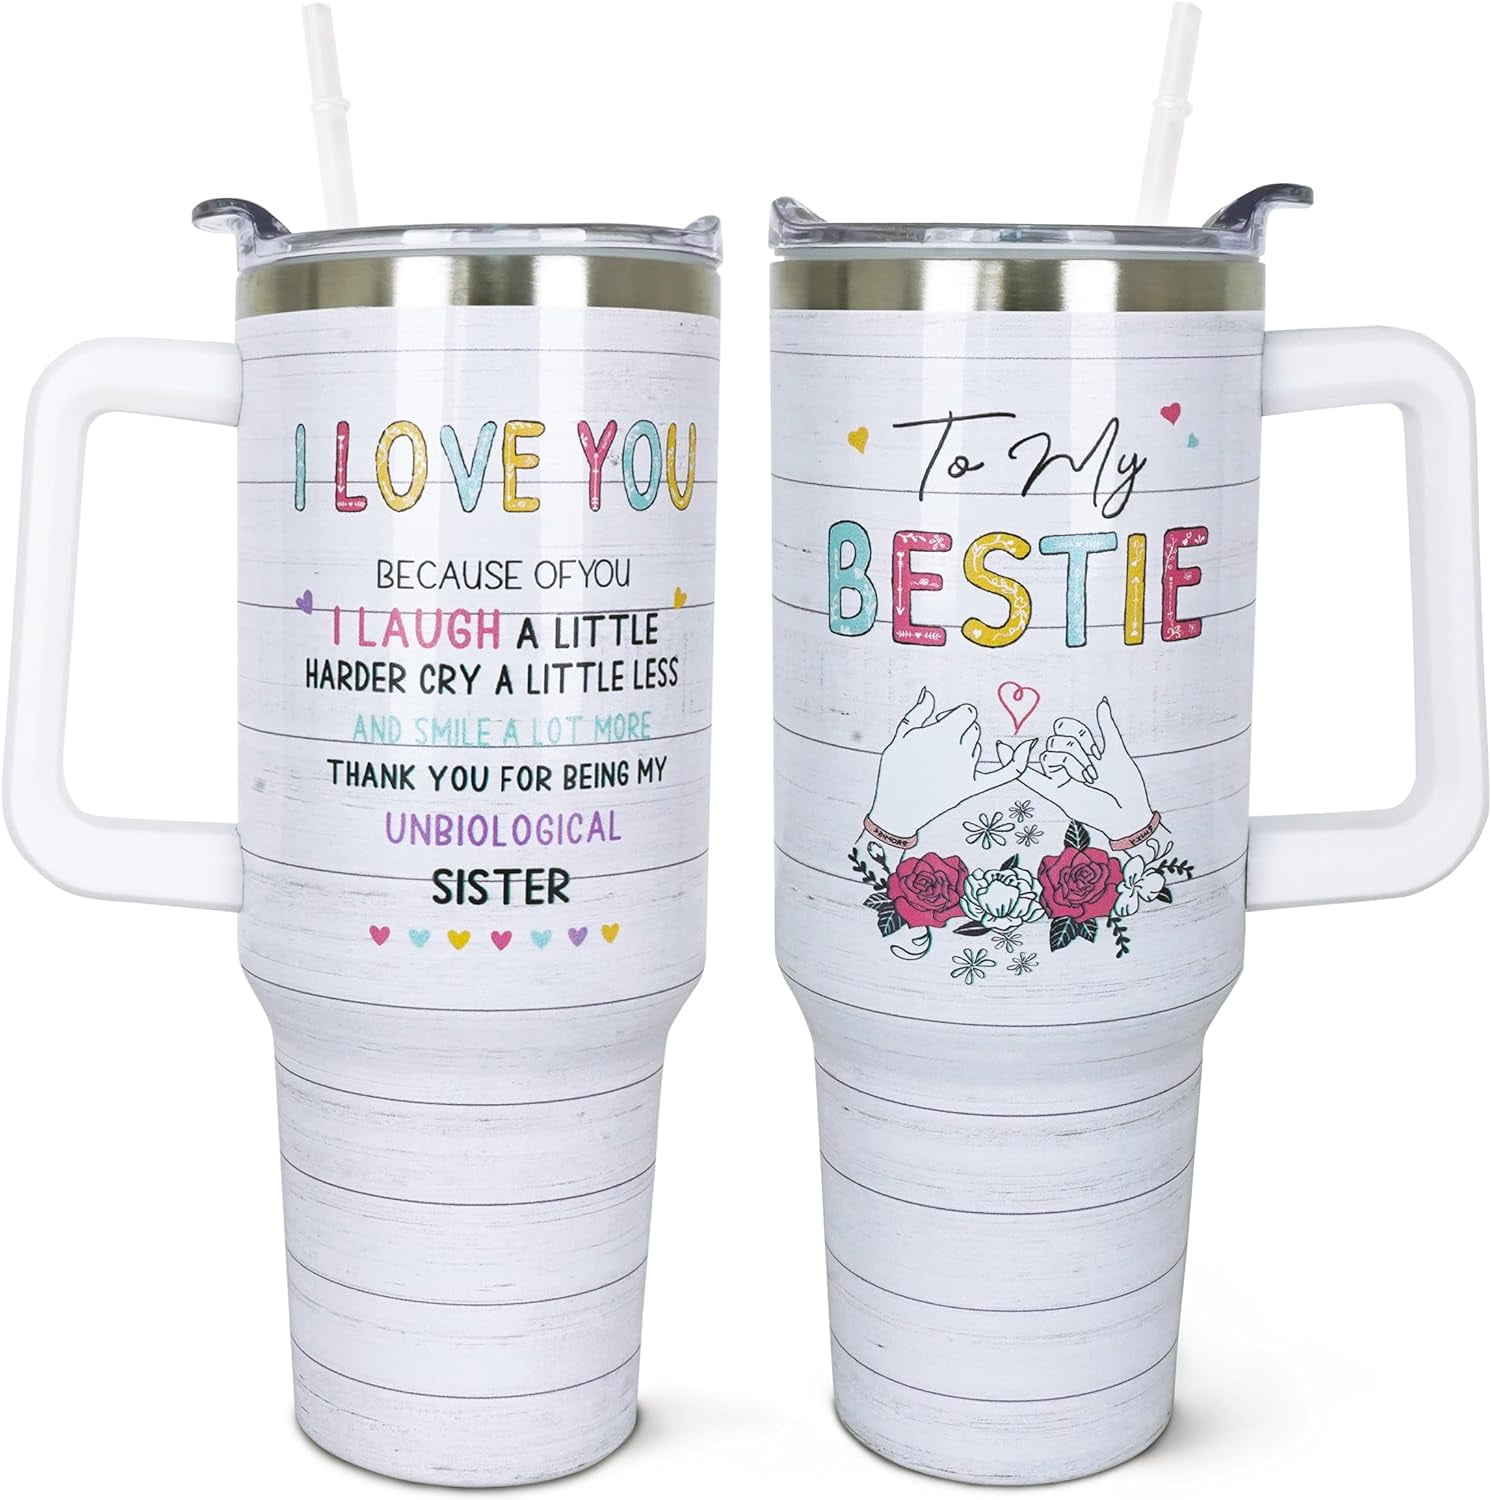 Funny Gifts for Her Wife Girlfriend Friends Teenage Girls-12 oz Wine  Tumbler with Straws,Lids-Gifts for Women Mom Sister, Presents Ideas for